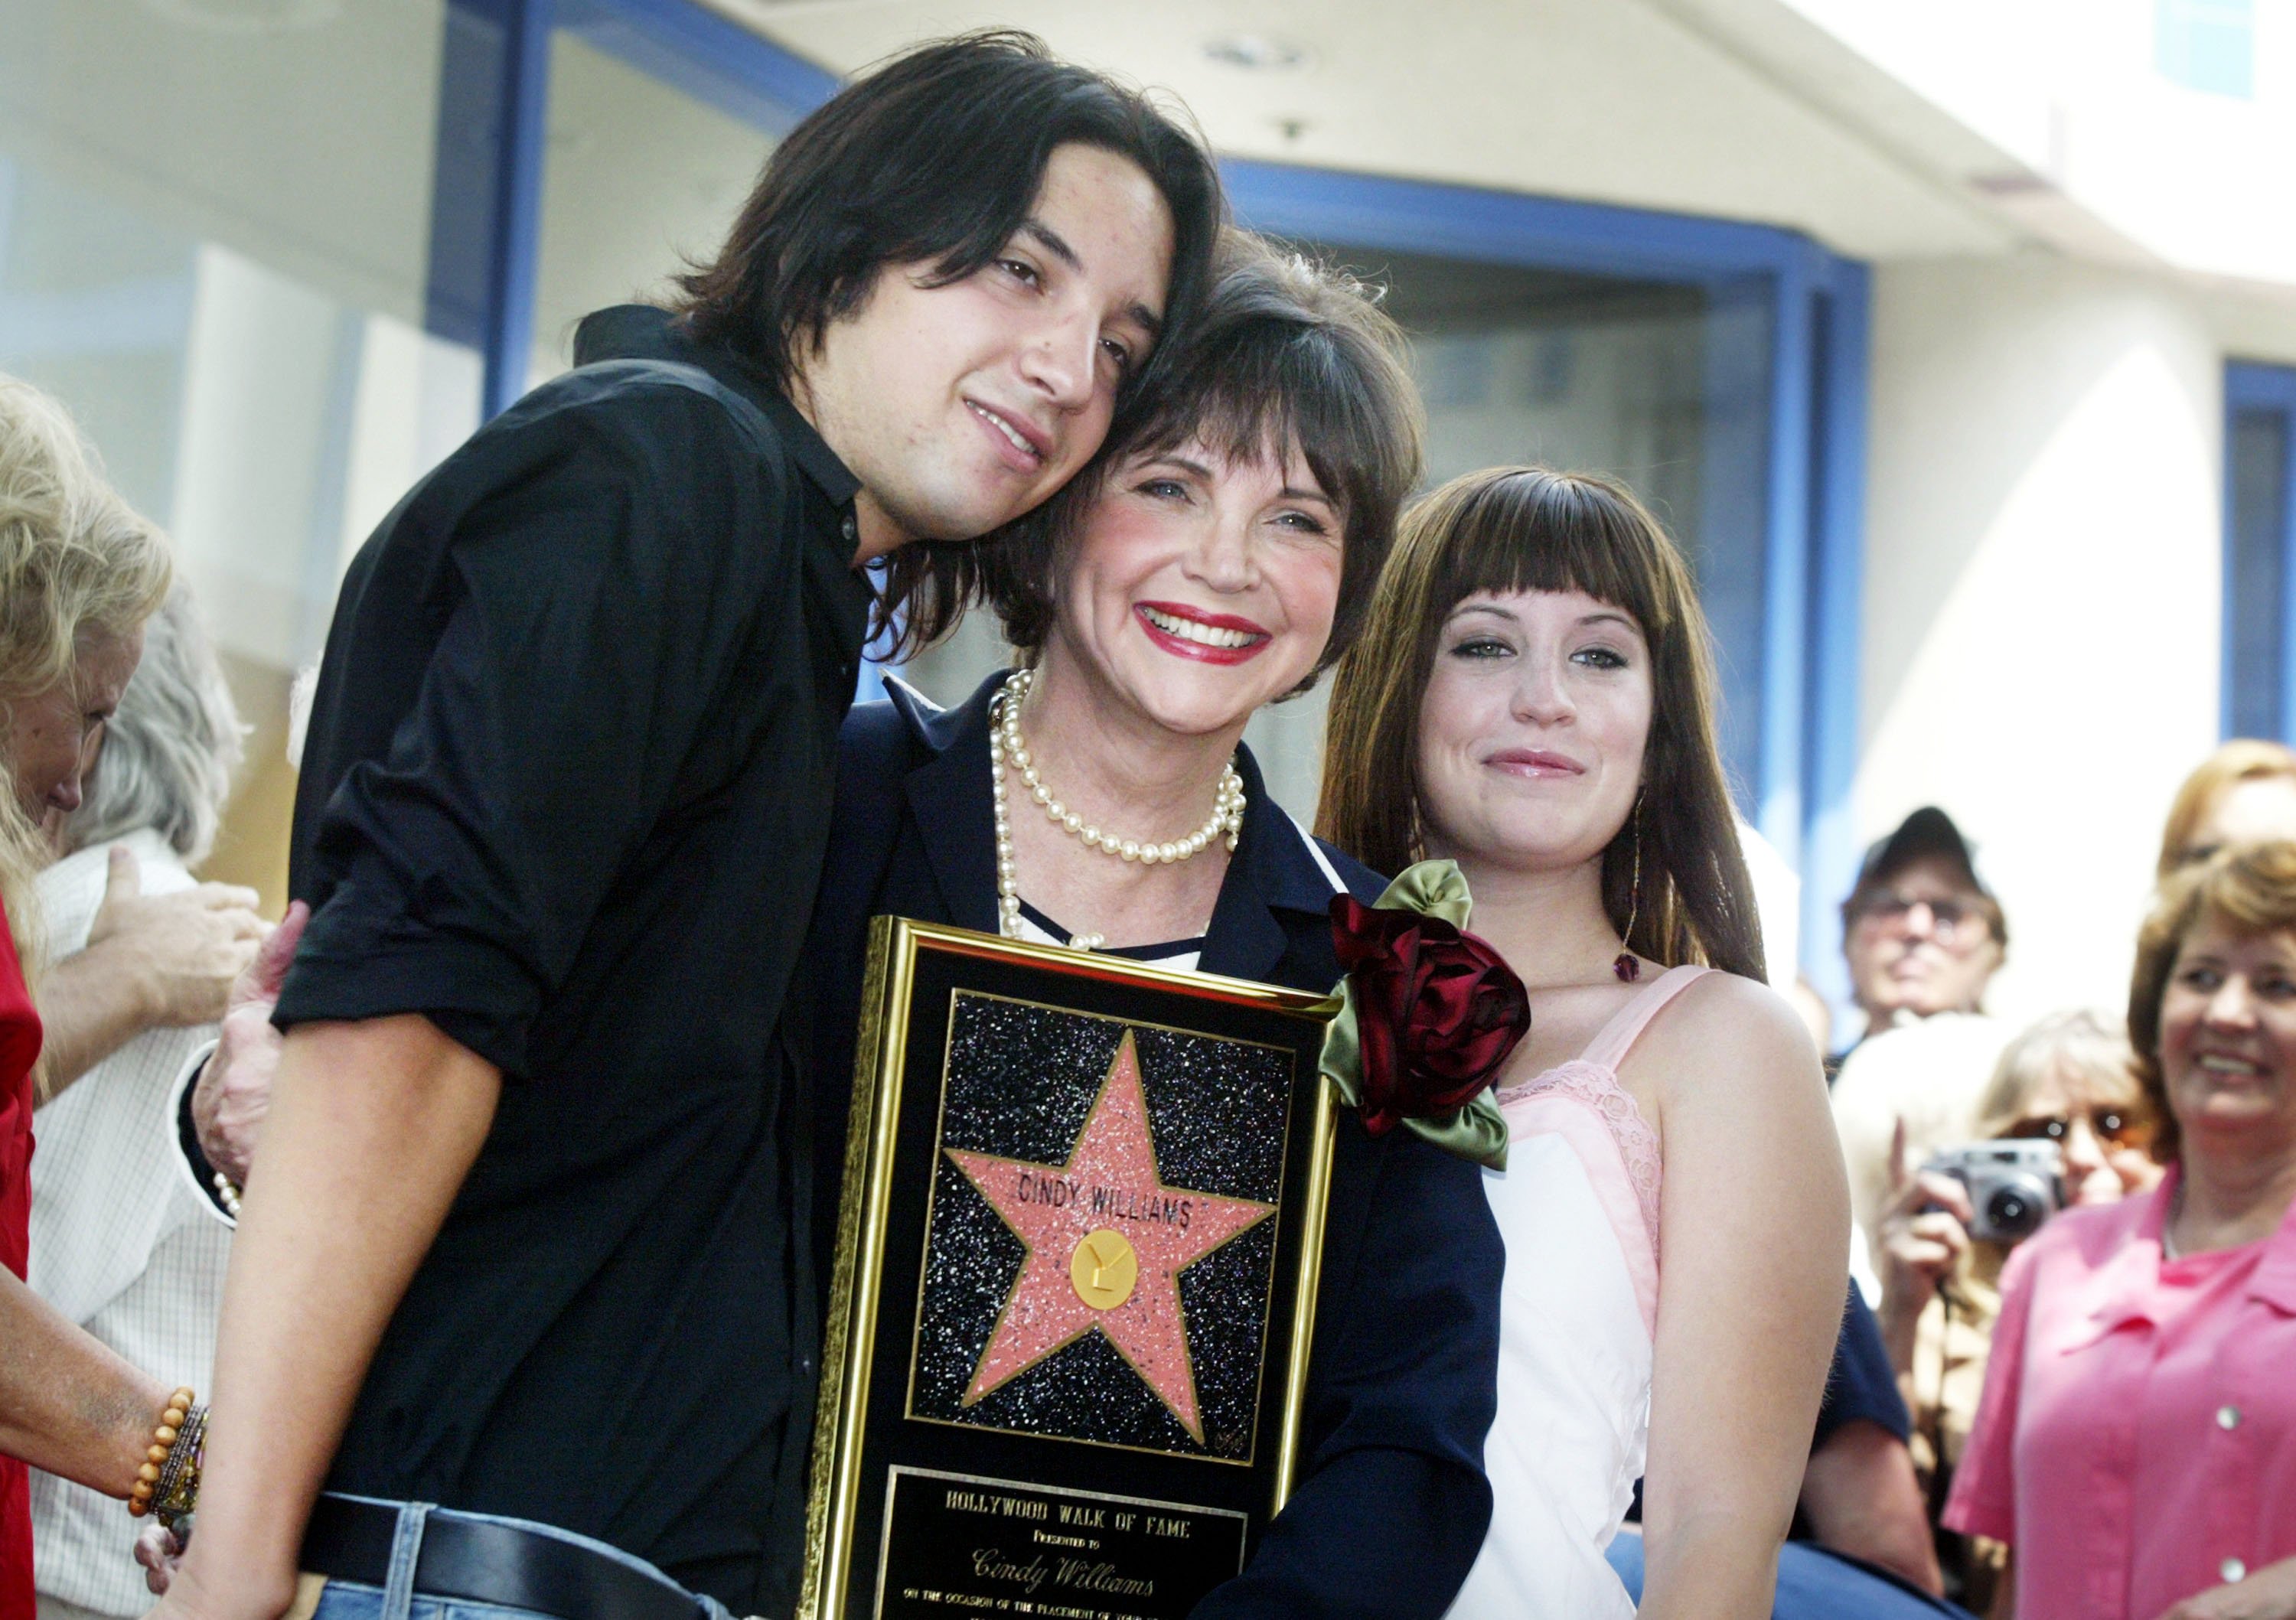 William Zachary "Zach" Hudson, Cindy Williams, and Emily Taylor Hudson as Cindy Williams receives a star on the Hollywood Walk of Fame on August 12, 2004 | Source: Getty Images